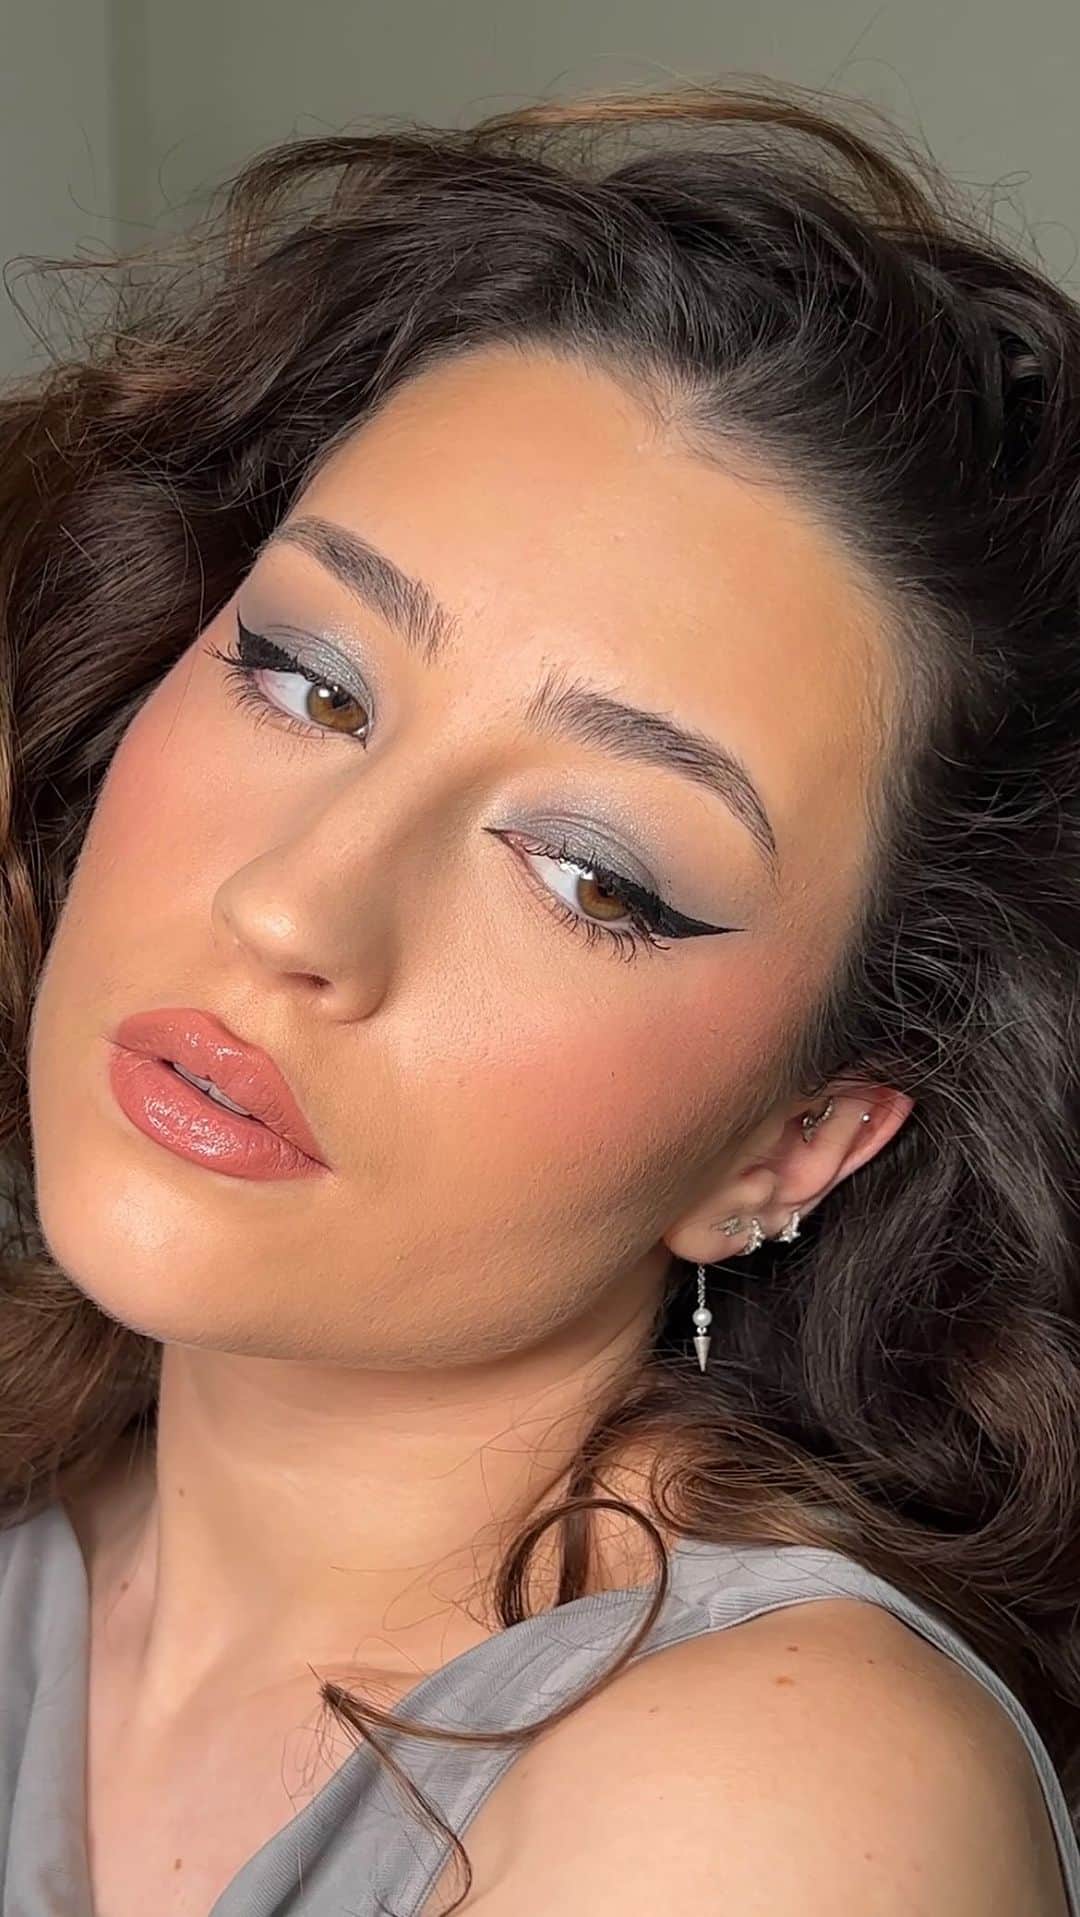 KIKO MILANOのインスタグラム：「@maggieanne.n is going for a sleek winged liner and a glossy nude lip! ✨ Ready to rock this stunning look? Dive into our #KIKOBlackFriday: snag 3 #KIKOMilano must-haves and enjoy 3 free goodies! 🎁 Elevate your beauty game while you stock up on glam essentials 💄 *Check our website for local promo details.  Unlimited Foundation 2N - Sculpting Touch Creamy Contour Stick 200 - Velvet Touch Creamy Blush Stick 07 - Highlighting Effect Fluid Concealer 01 - Long Lasting Eyeshadow Stick 21 - Energy Shake All Day Lasting Liquid Eyeliner - Maxi Mod Volume And Definition Mascara - Creamy Color Comfort Lip Liner 04 - Powder Power Lipstick 01 - 3D Hydra Lip Gloss 03 - Face 15 Sculpting Brush - Eyes 66 Pointed Blending Brush - Face 04 Stippling Foundation Brush  #KIKOTrendsetters #makeuptutorial #eyeshadowtutorial #lipcombo #BlackFriday」